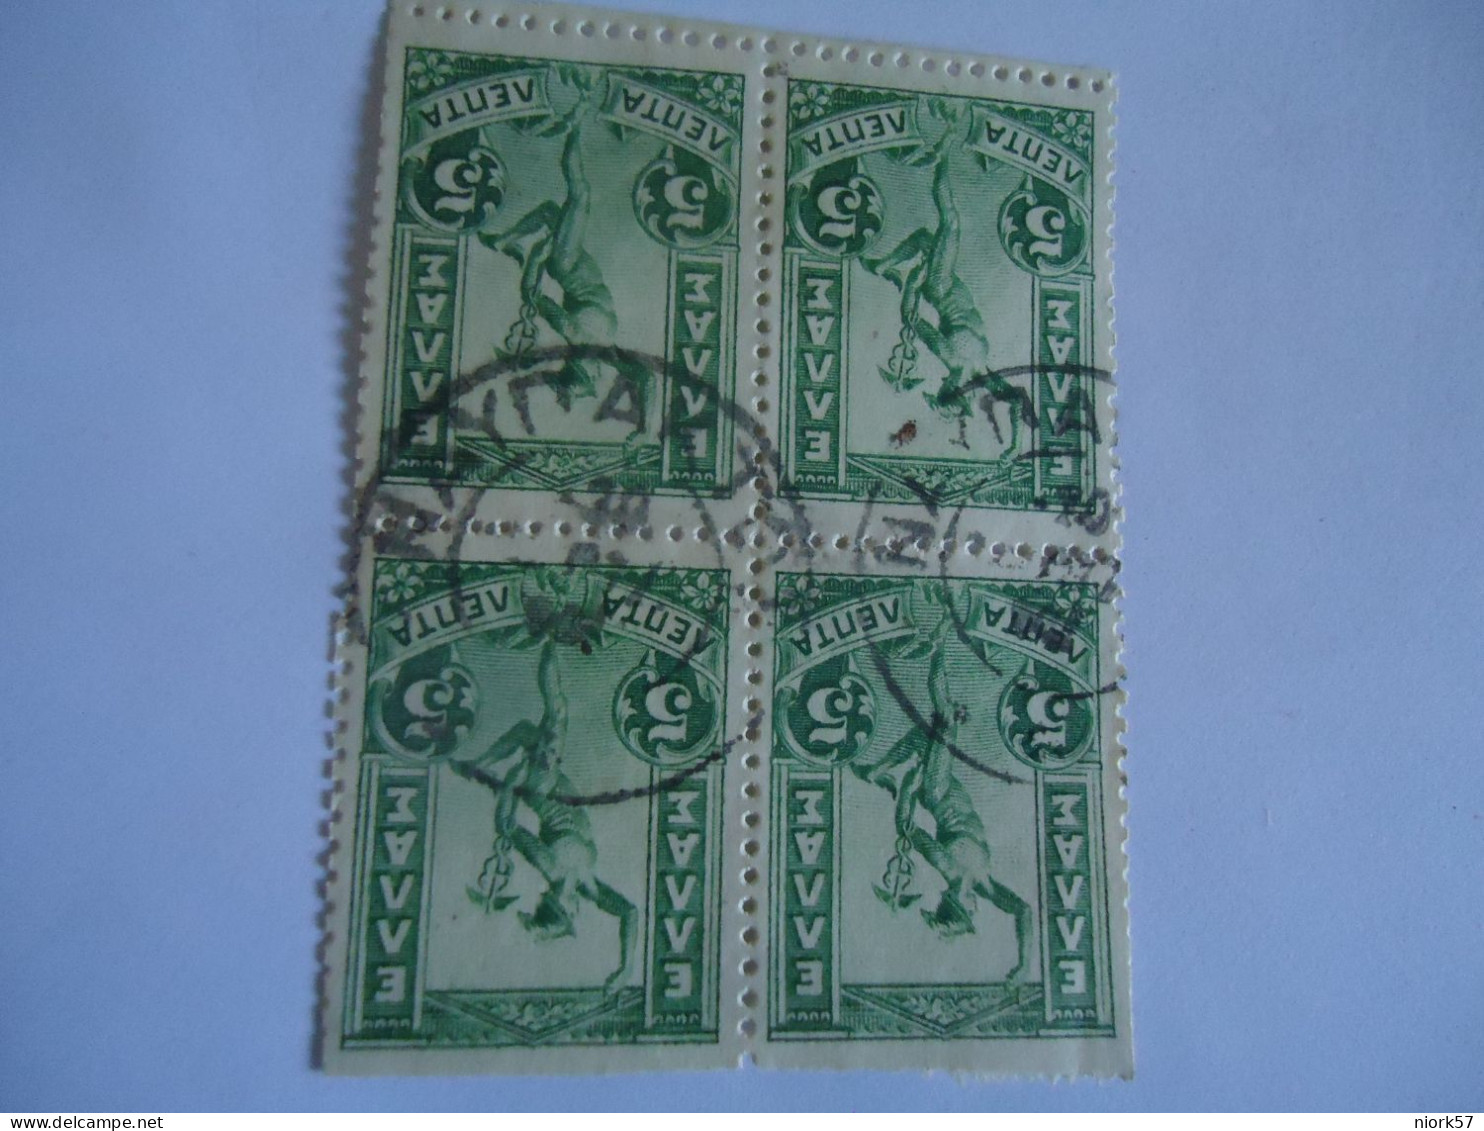 GREECE USED STAMPS BLOCK OF 4 1901 FLYING    POSTMARK  ΝΑΥΠΑΚΤΟΣ - Oblitérés